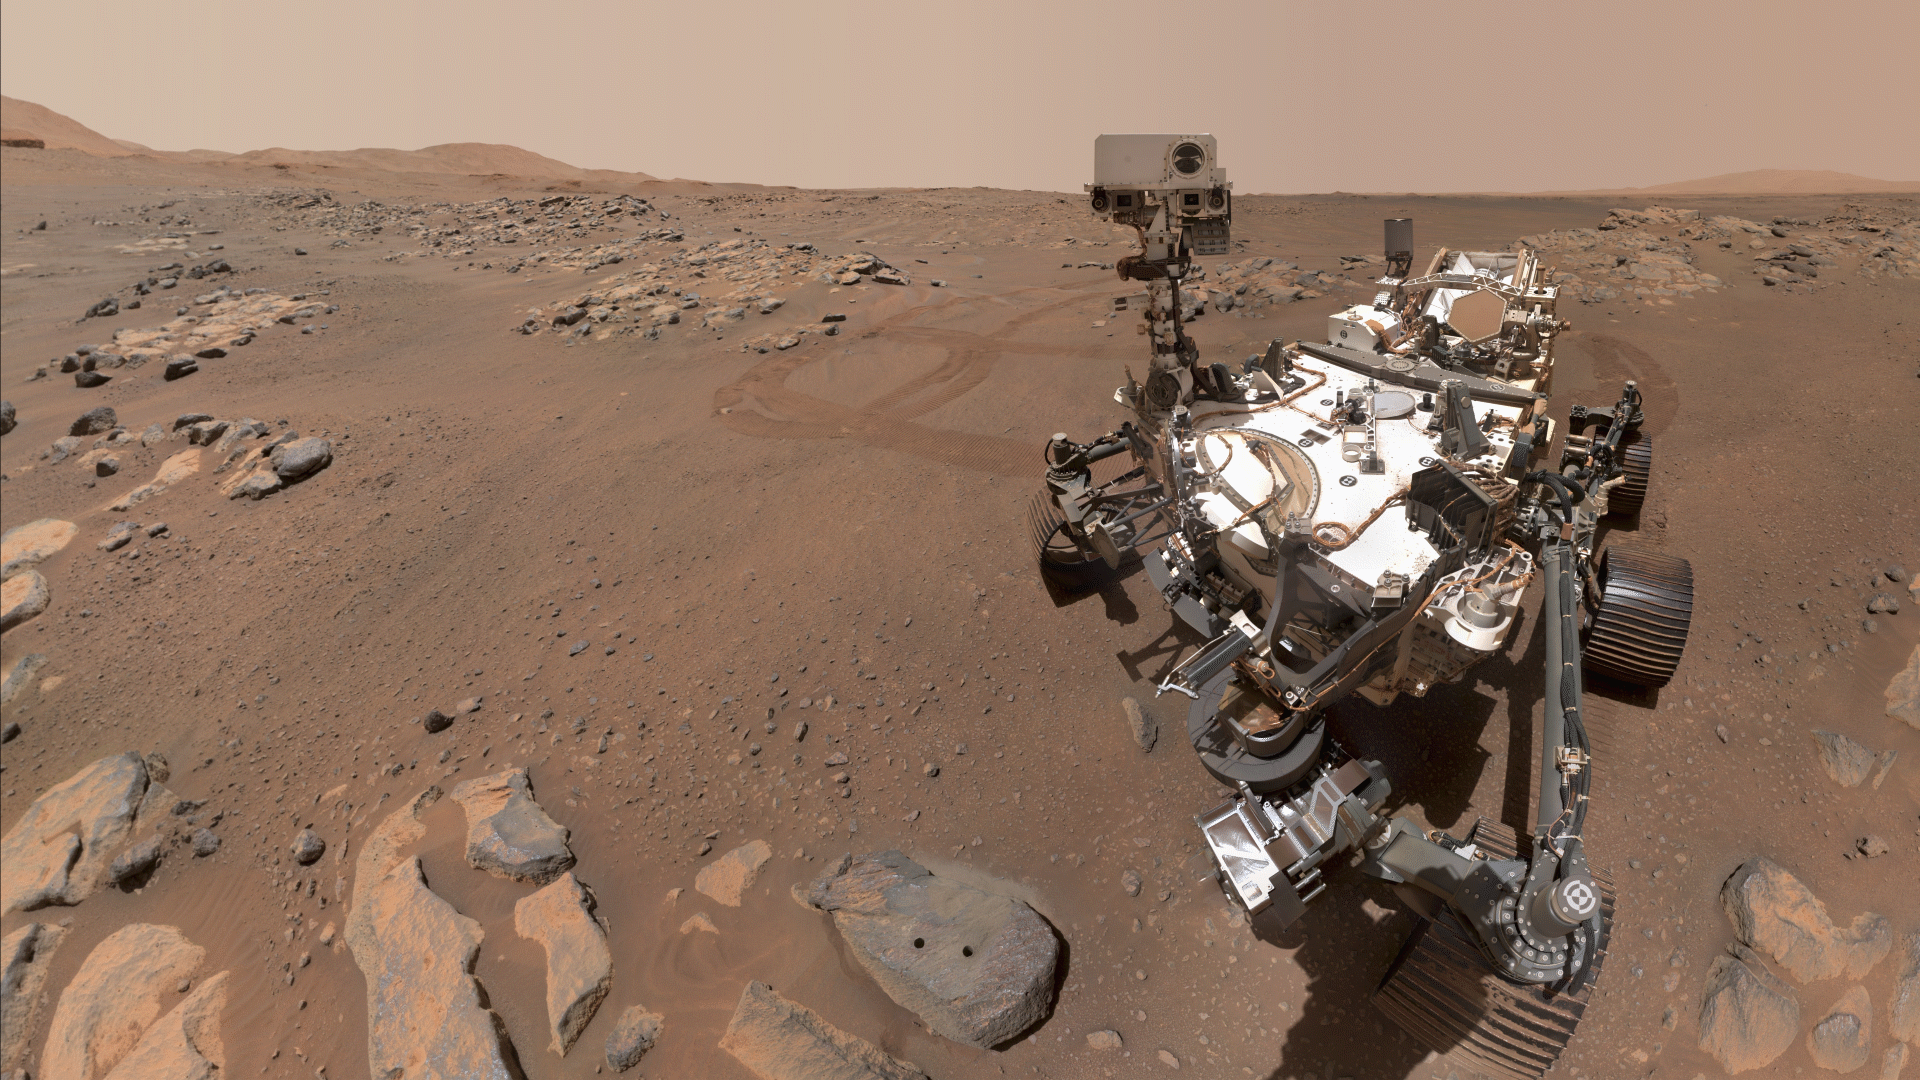 The Perserverence Rover on Mars.